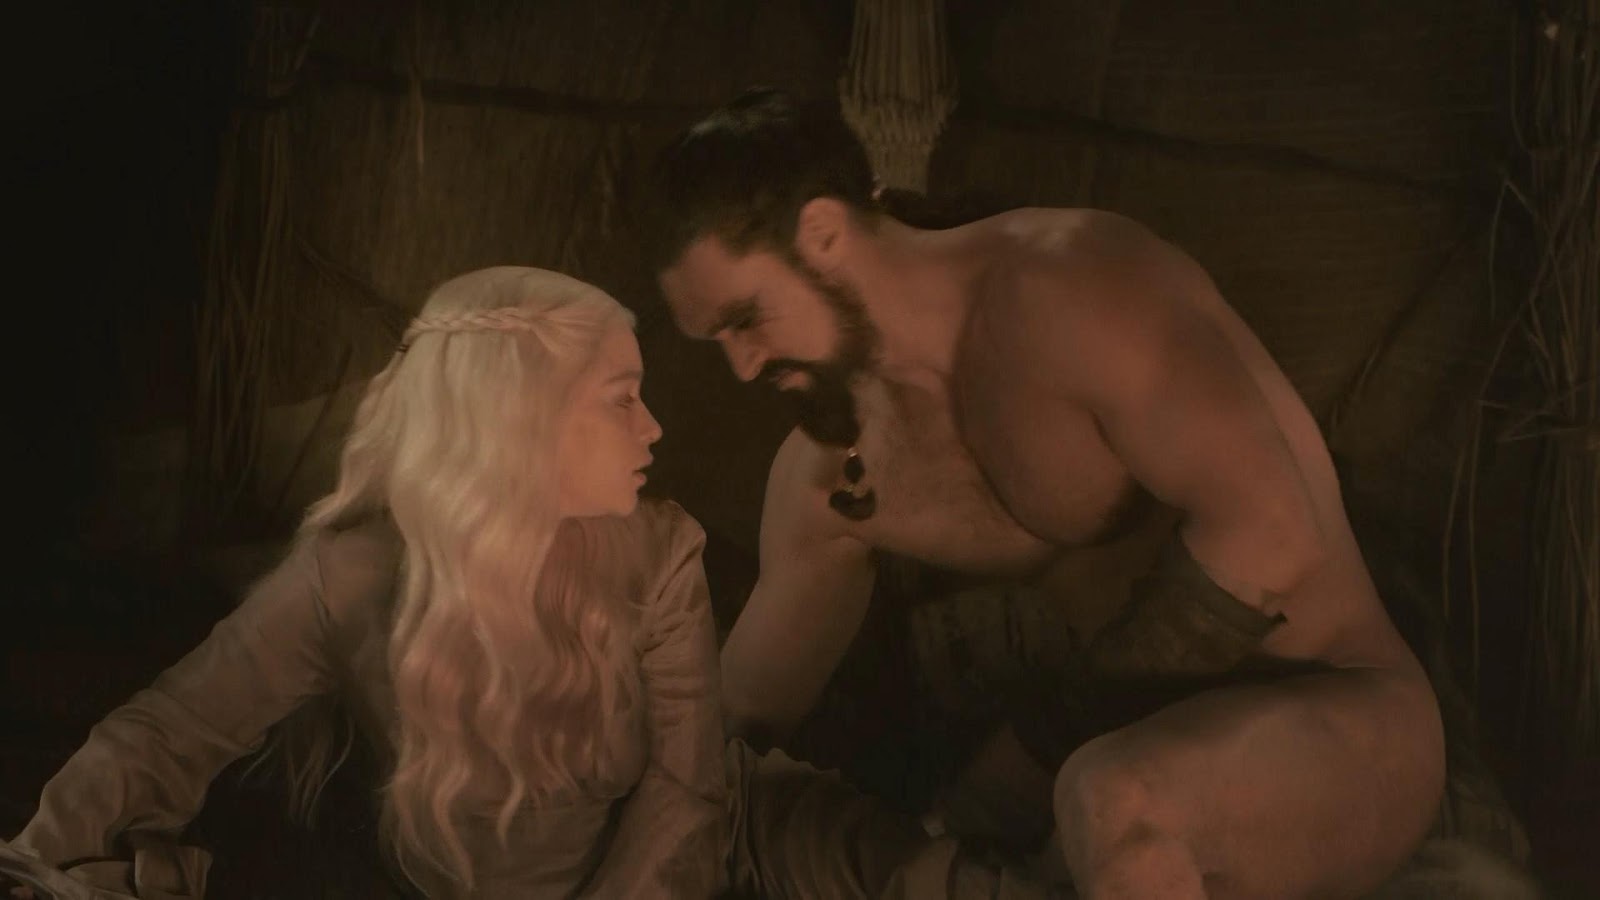 You have read this article Game of Thrones /Jason Momoa /rear nudity /serie...